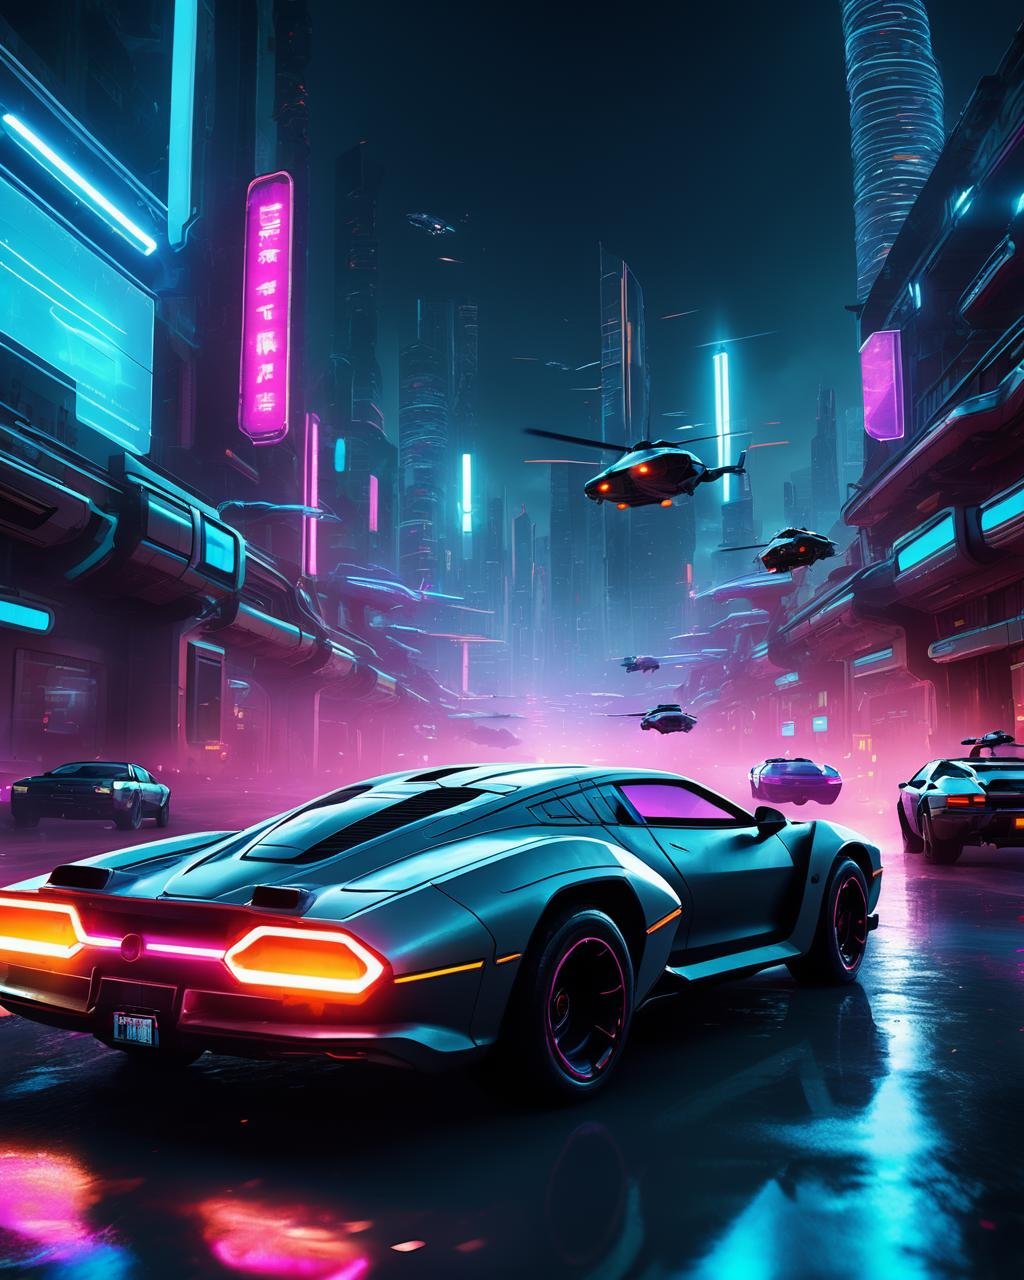 -A thrilling chase scene through a futuristic city, with neon lights, flying cars, and gunfire. Realistic textures and lighting create a hyper-realistic atmosphere.